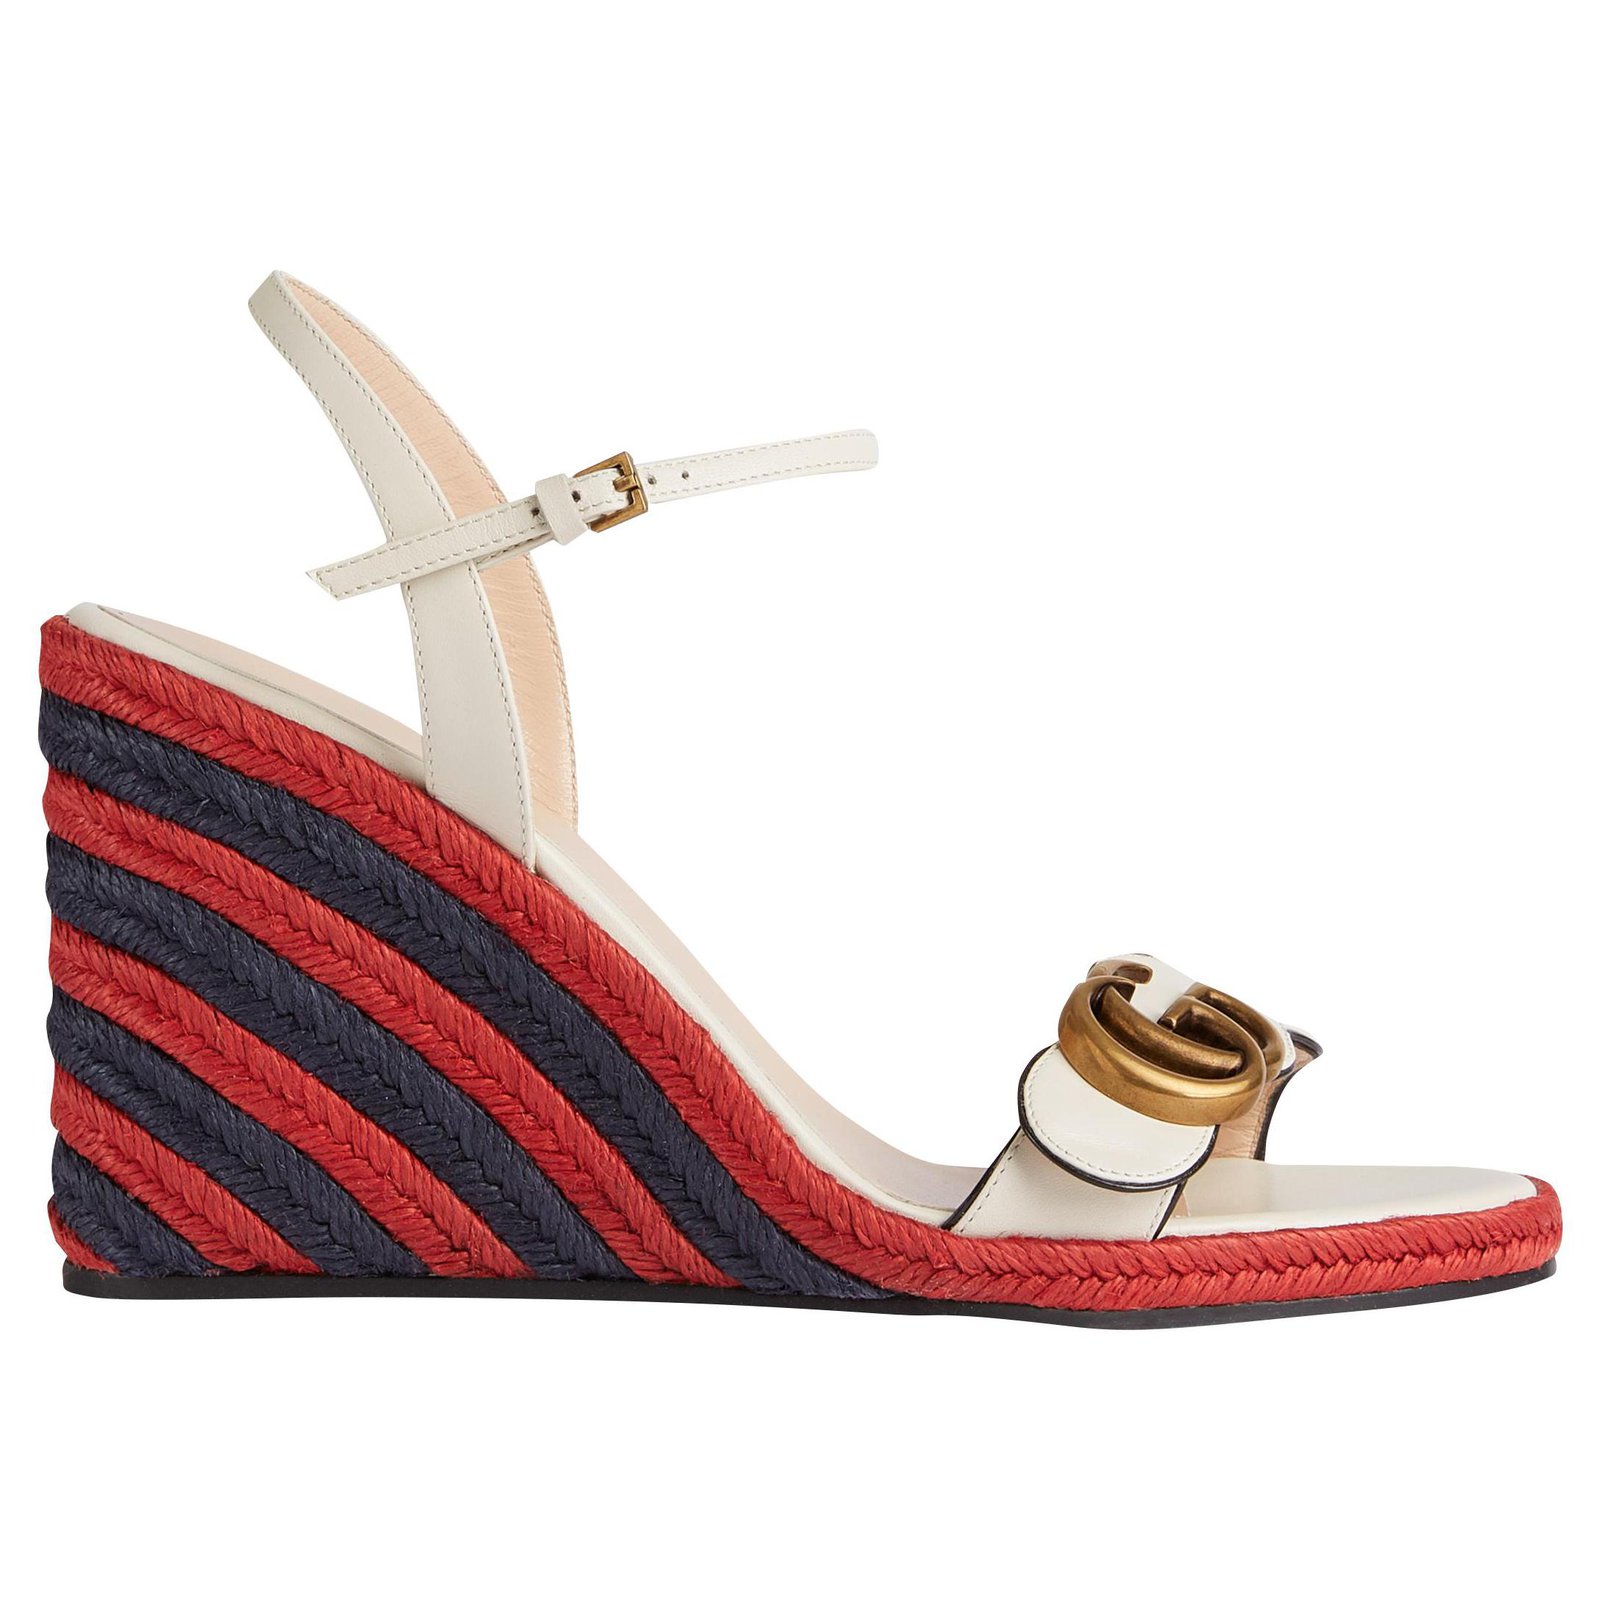 Louis Vuitton Women's Buckle Wedge Espadrille Sandals Leather Red